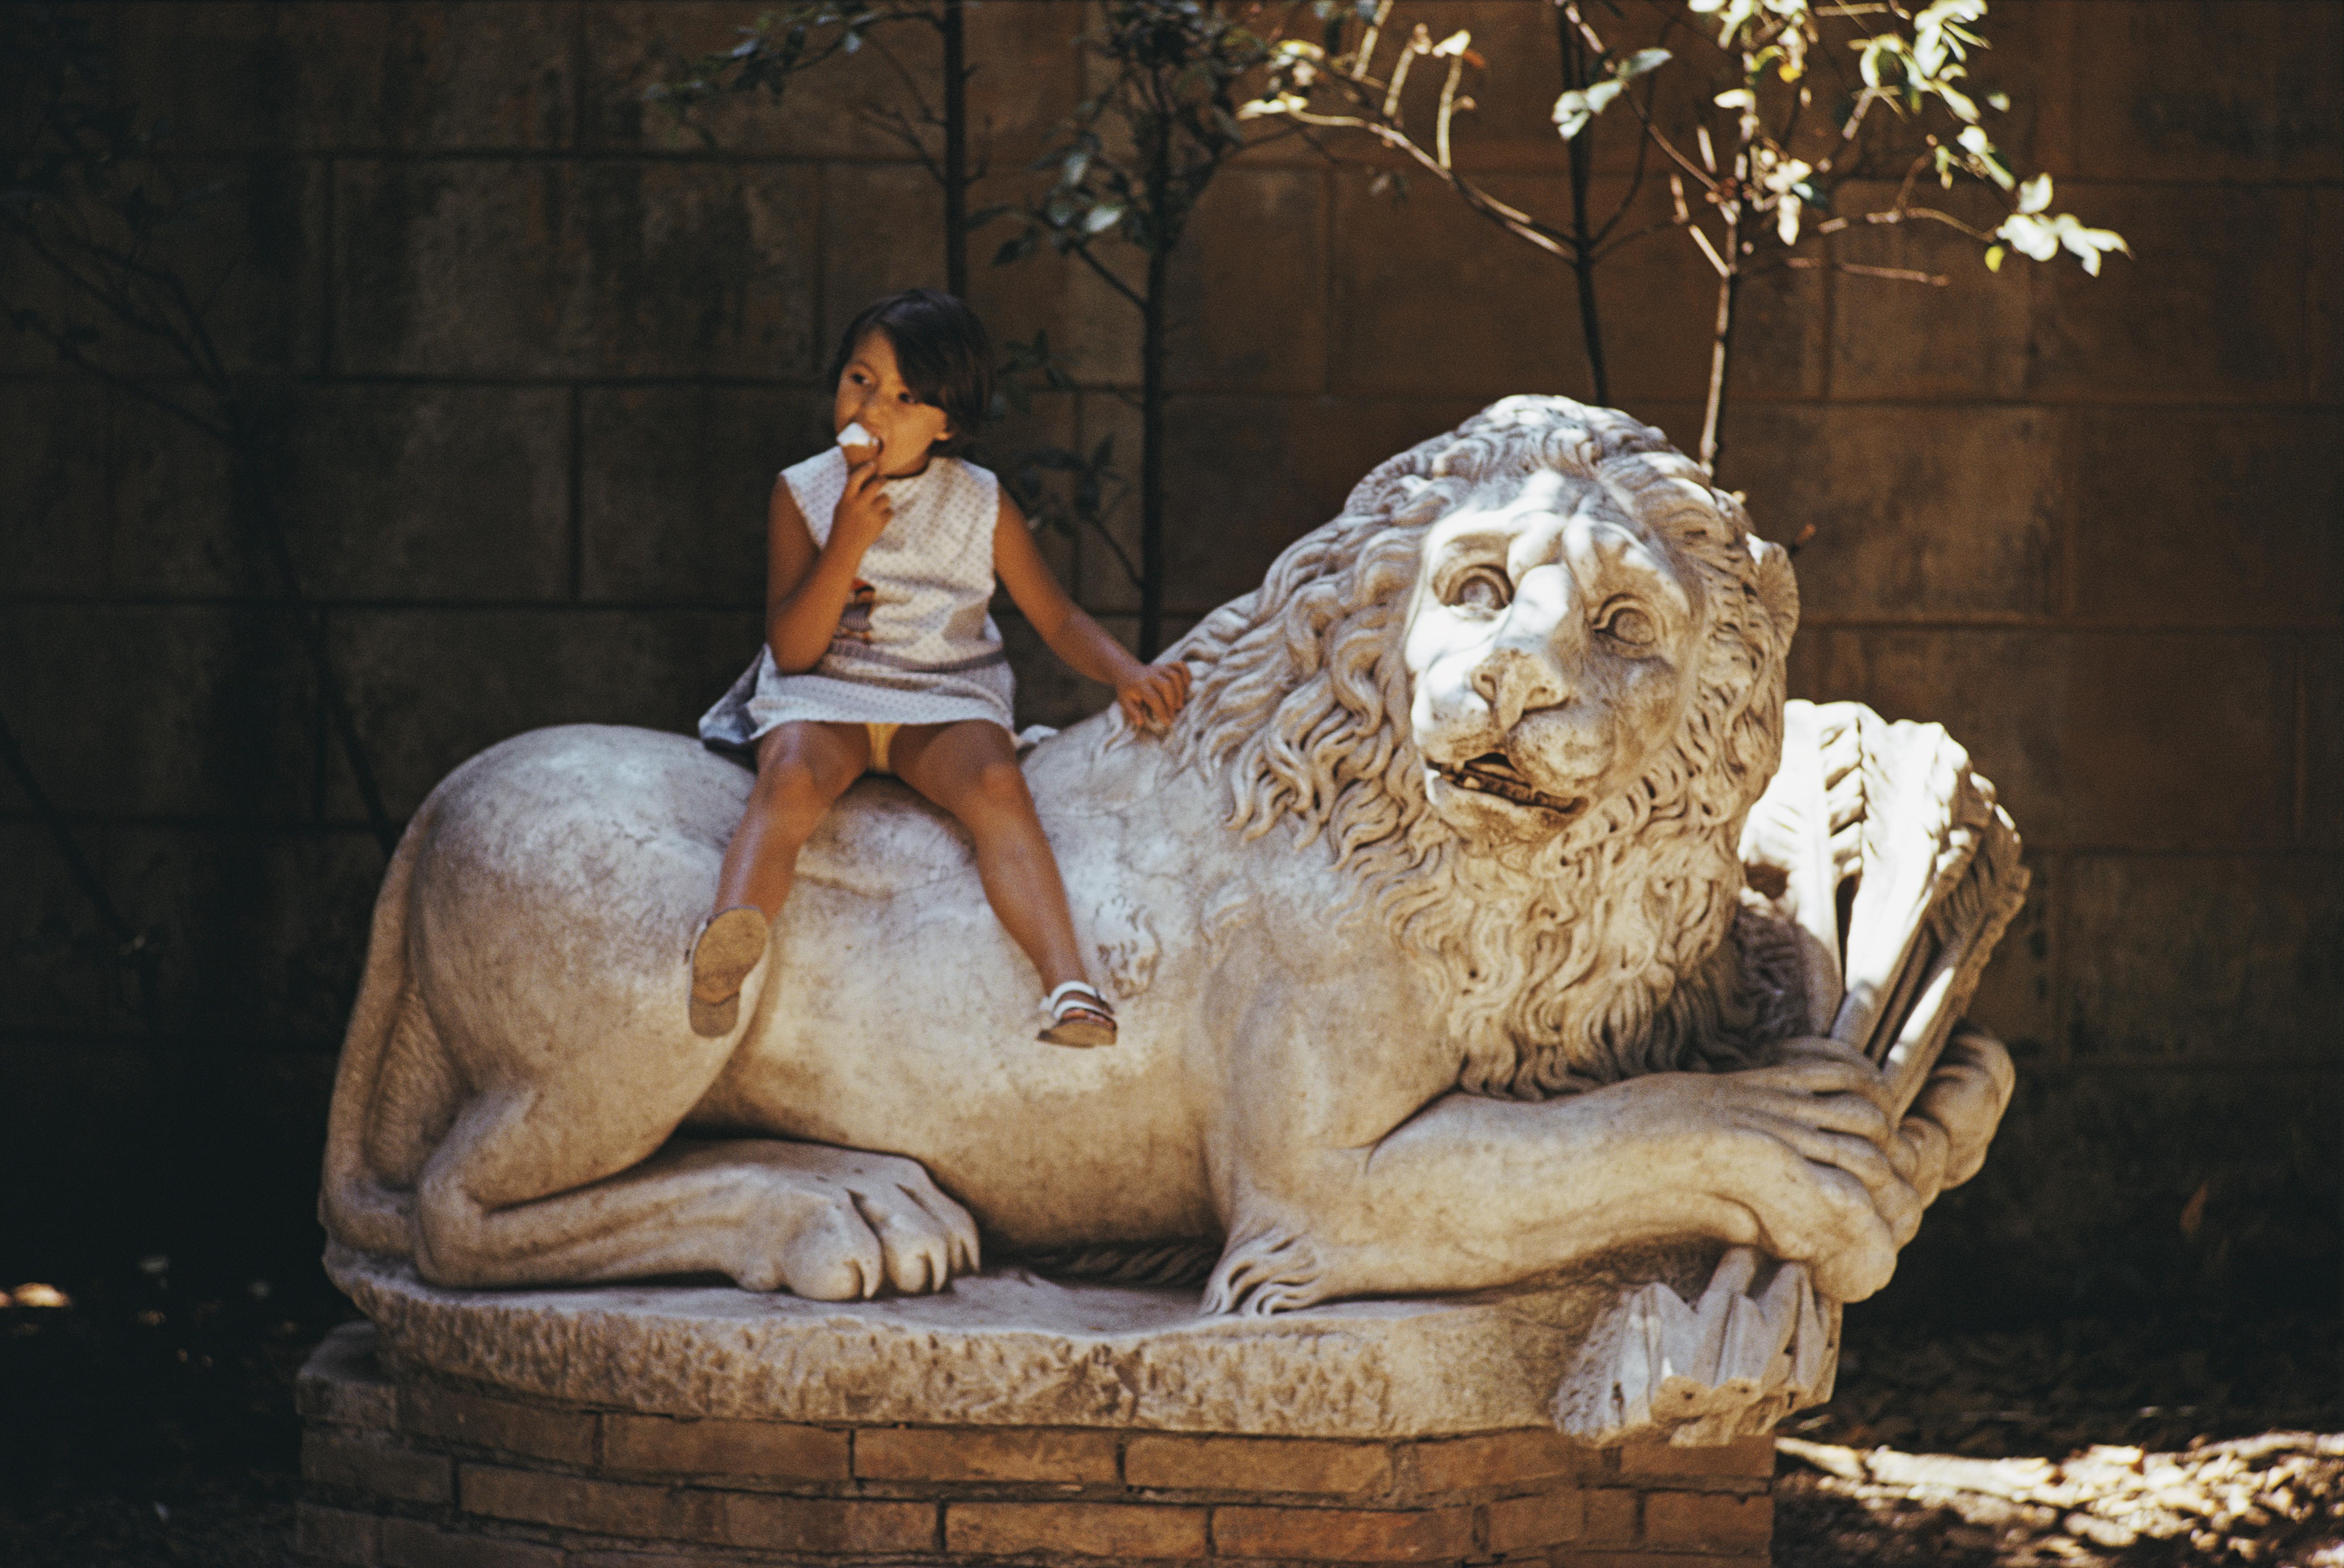 'Villa Borghese Lion' 1970 Slim Aarons Limited Estate Edition Print 

A young girl eating an ice cream while sitting on a sculpture of a lion in the grounds of the Villa Borghese in Rome, Italy, 1970. 

Produced from the original